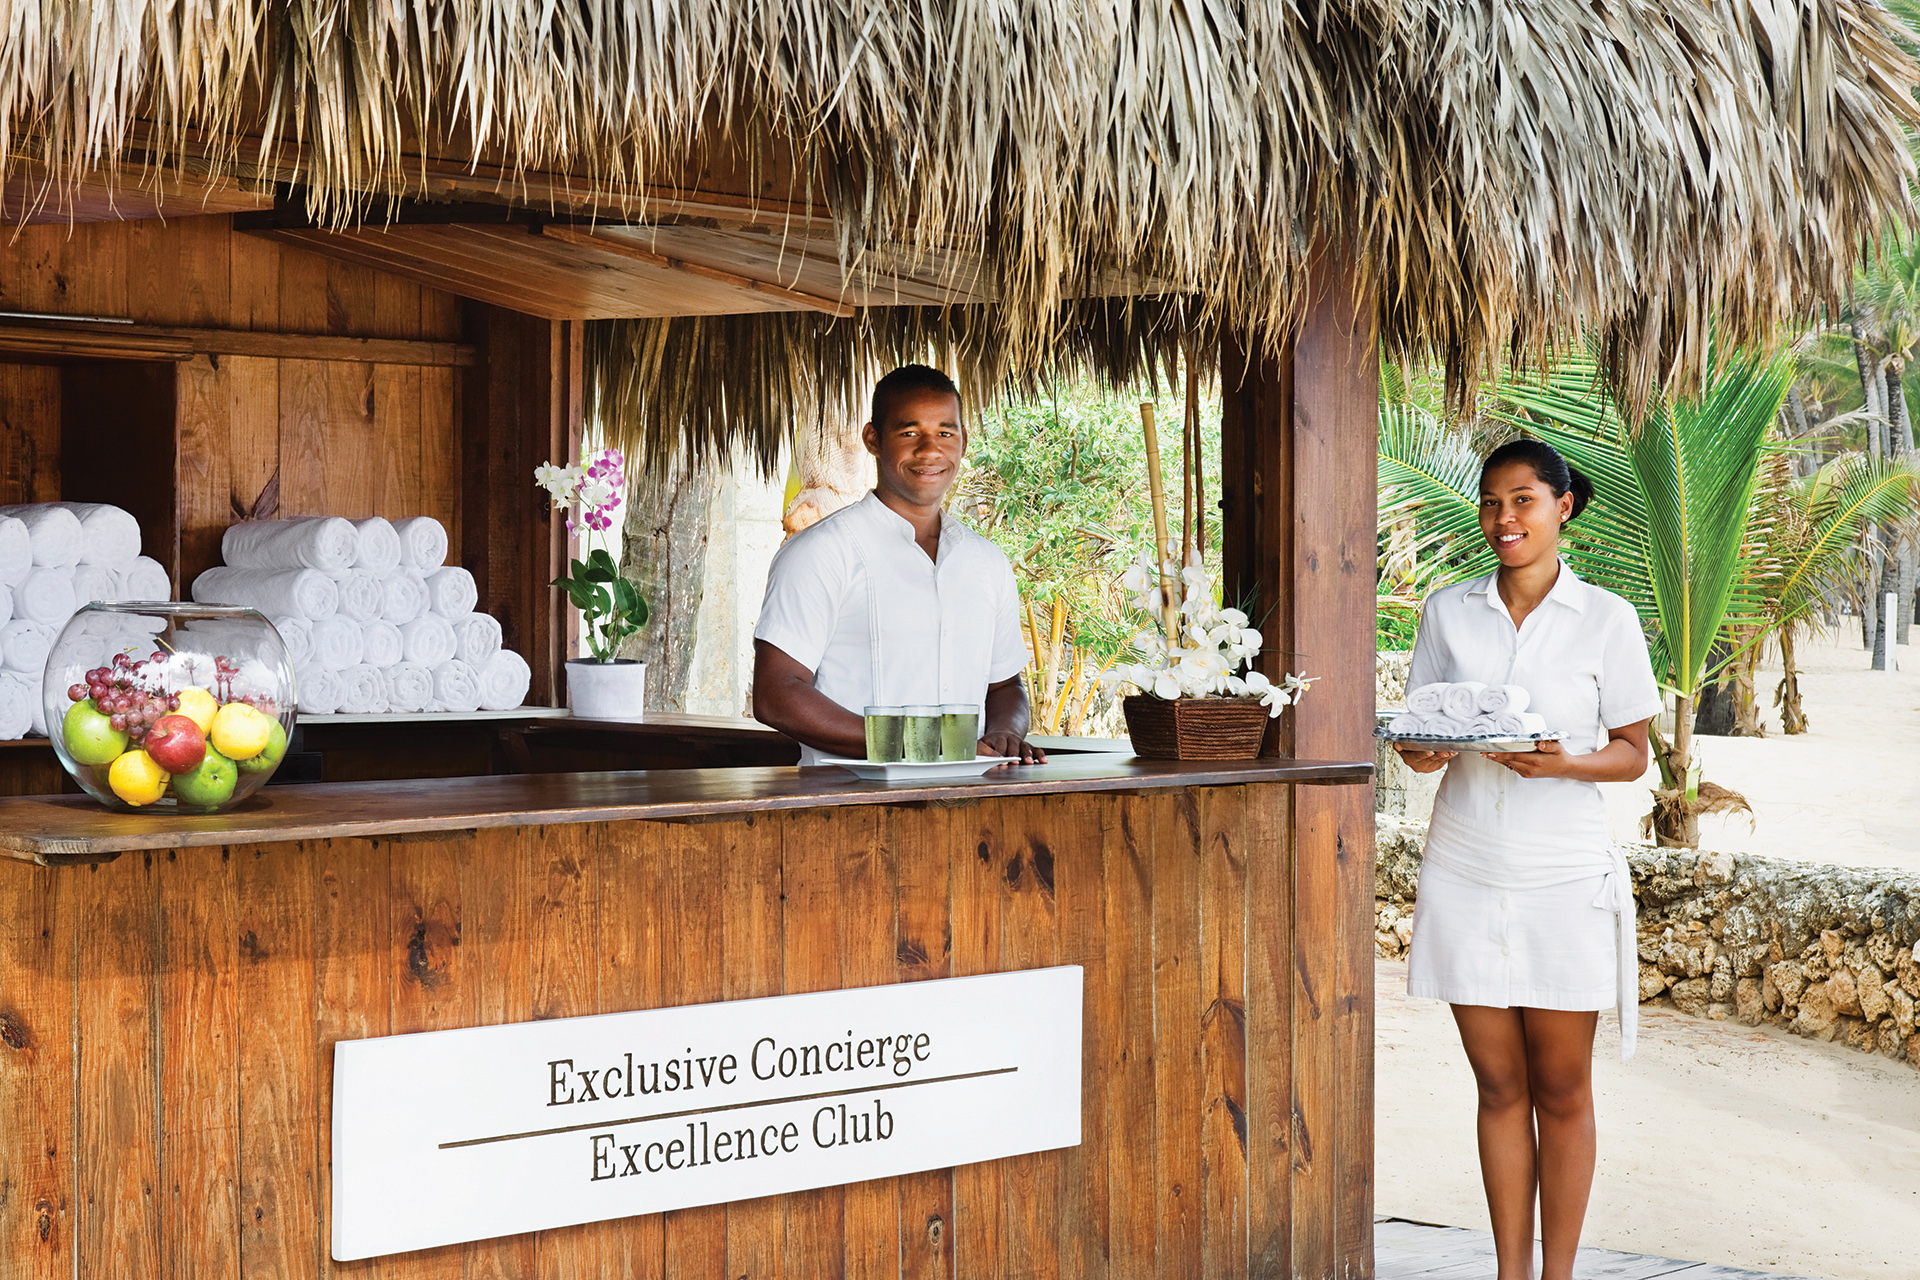 Exclusive beach concierge of Excellence Club